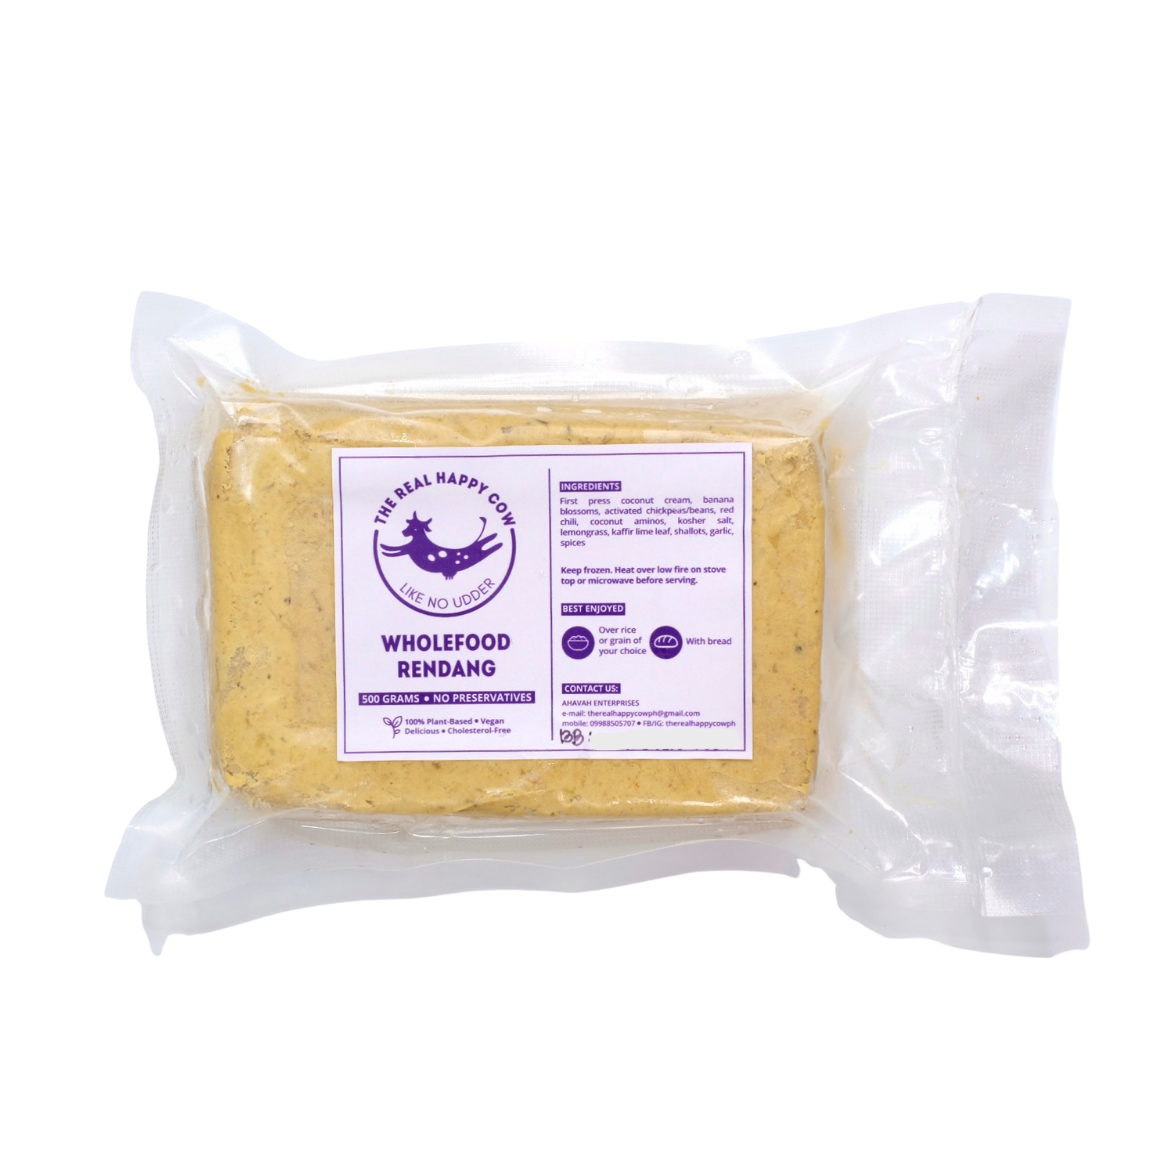 The Real Happy Cow Wholefood Rendang 500g